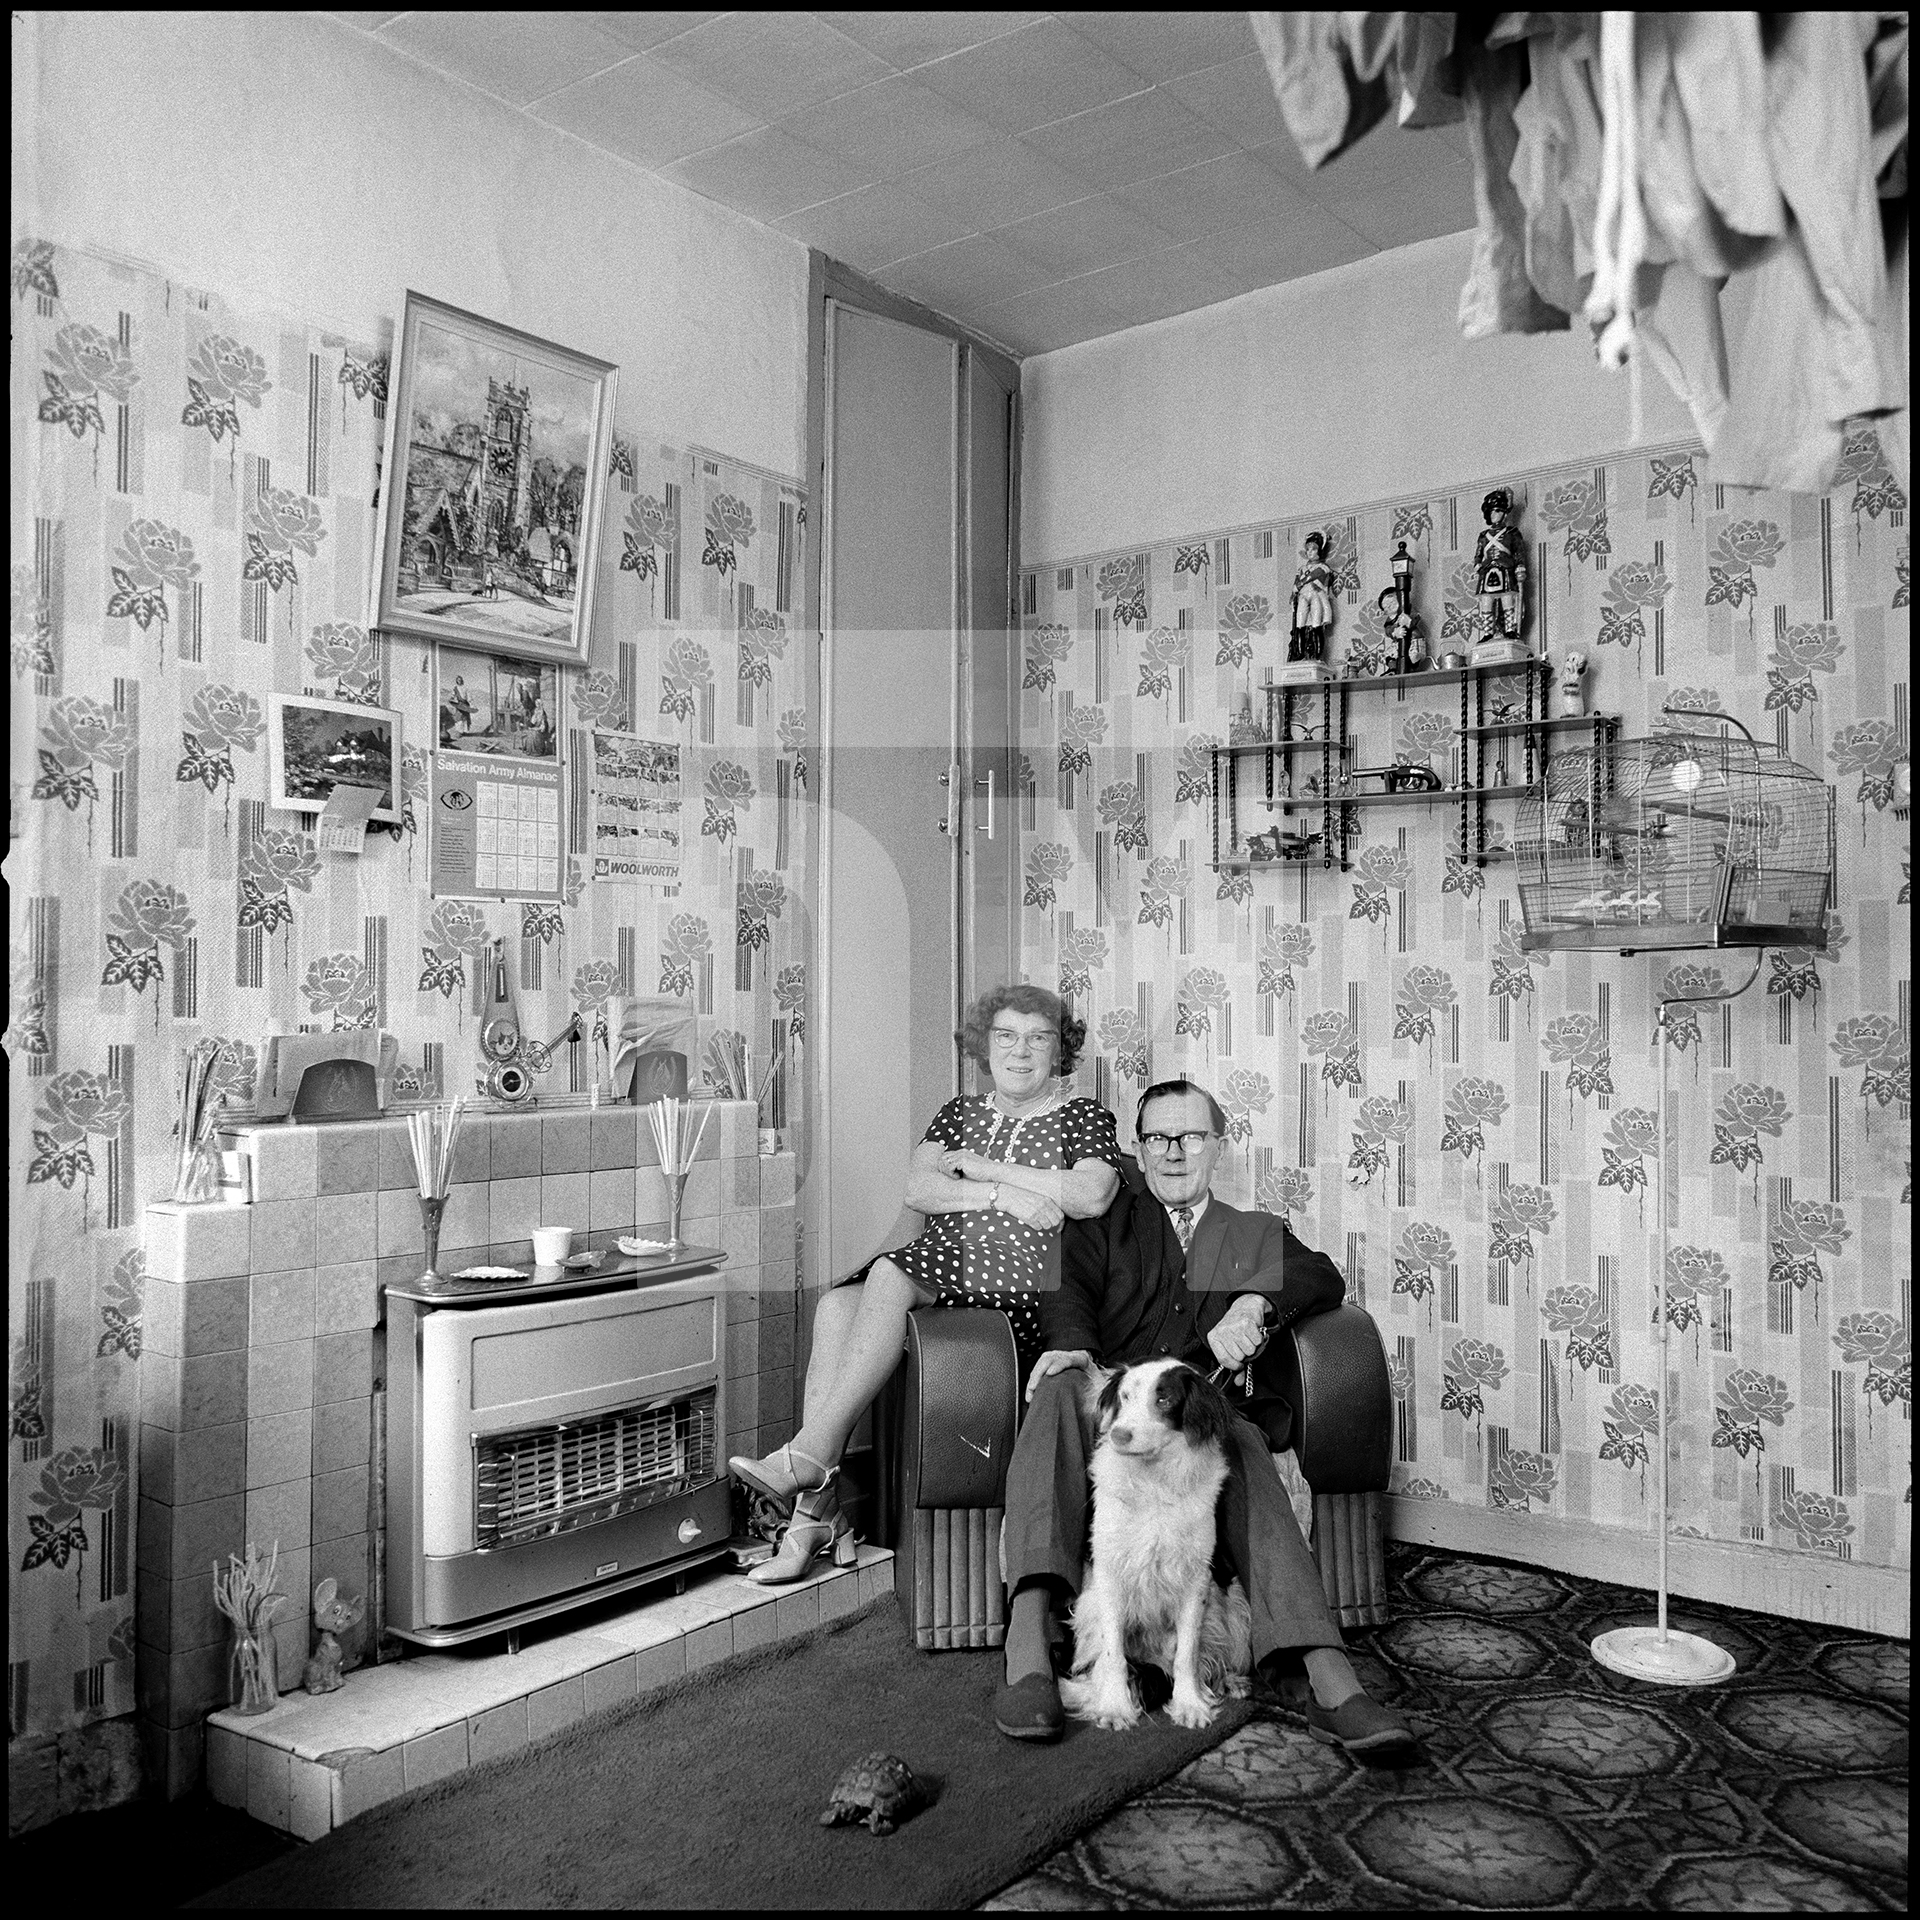 “Barry and Bill” (identified by the Craddock family, 1996). Residents of June Street, Salford. 1973 by Daniel Meadows